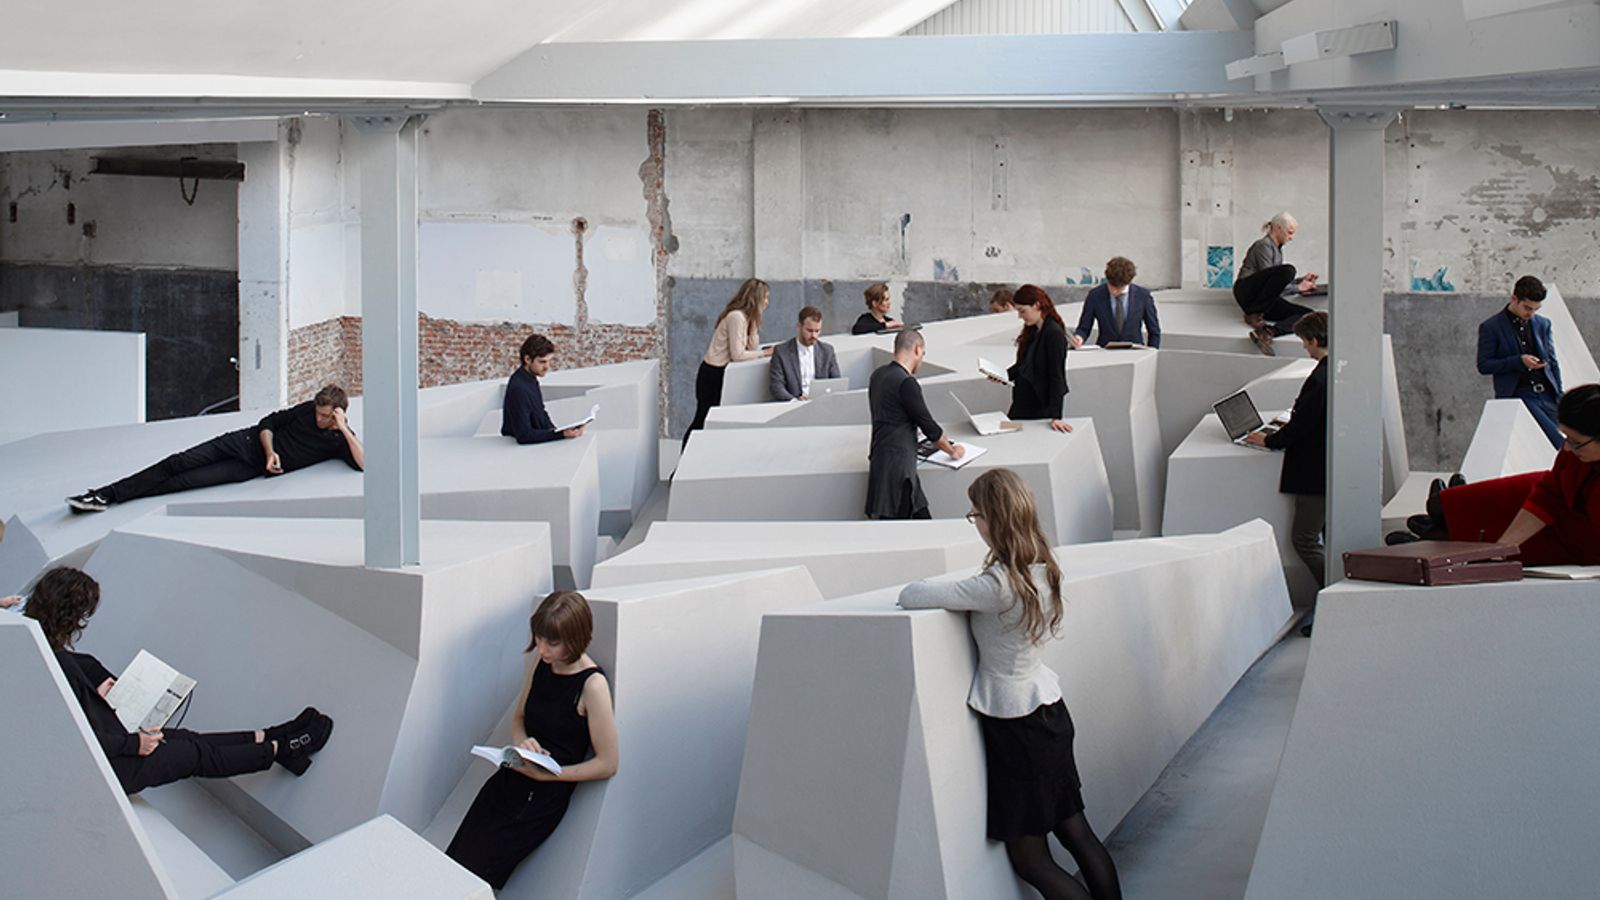 5 Architects’ Wild Designs of the Future Workplace